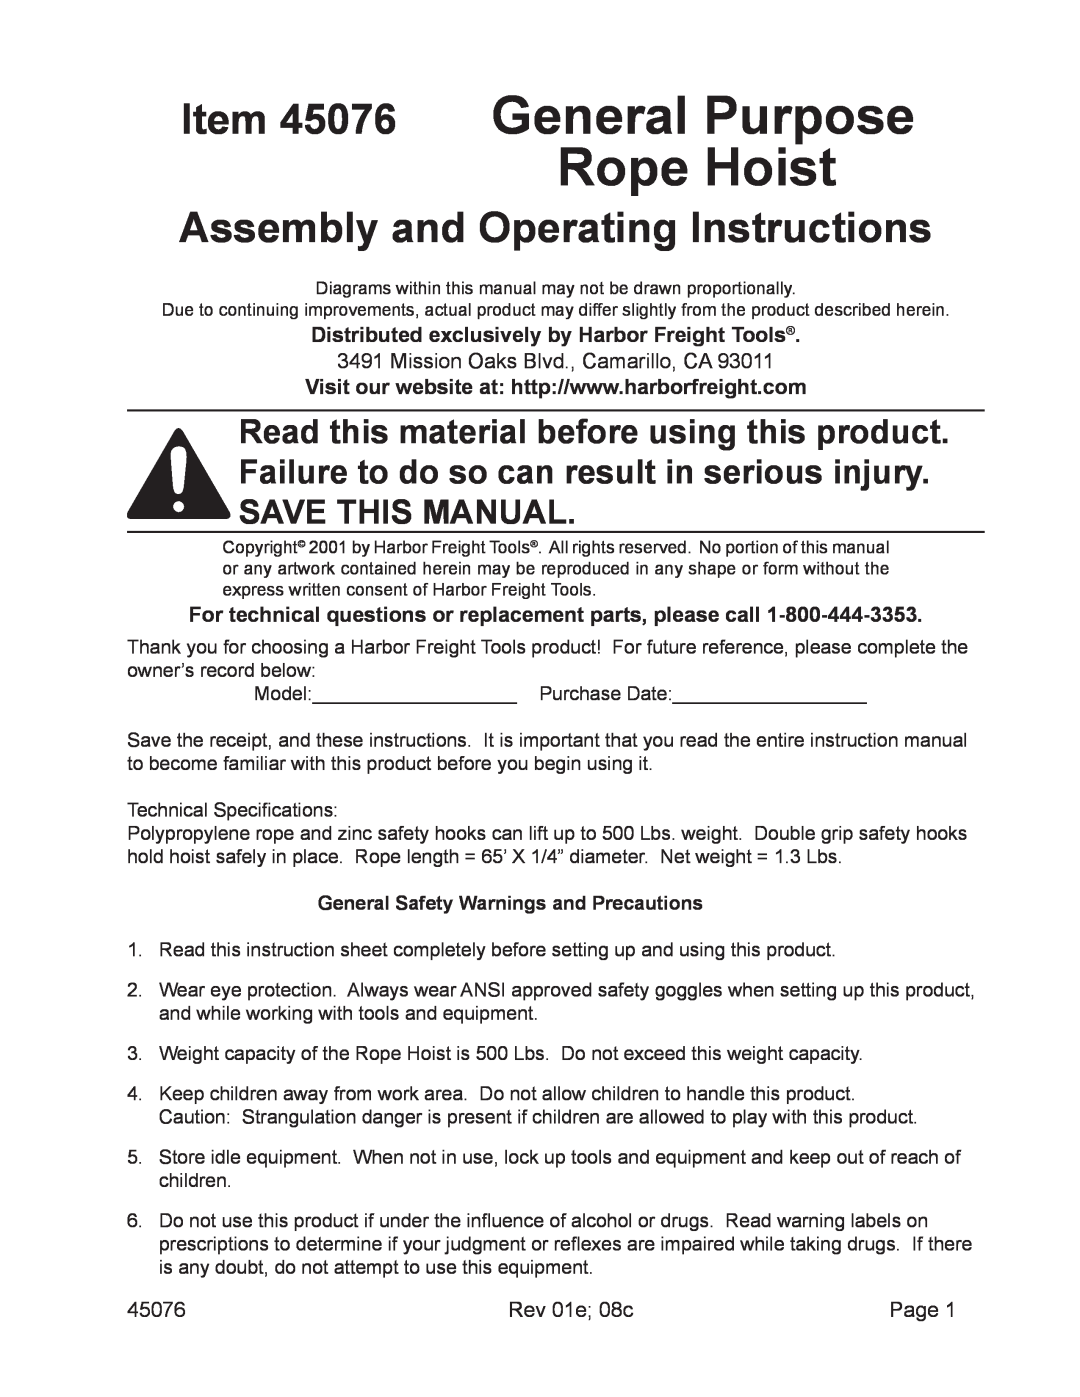 Harbor Freight Tools 45076 operating instructions Mission Oaks Blvd., Camarillo, CA, Rev 01e 08c, Page 